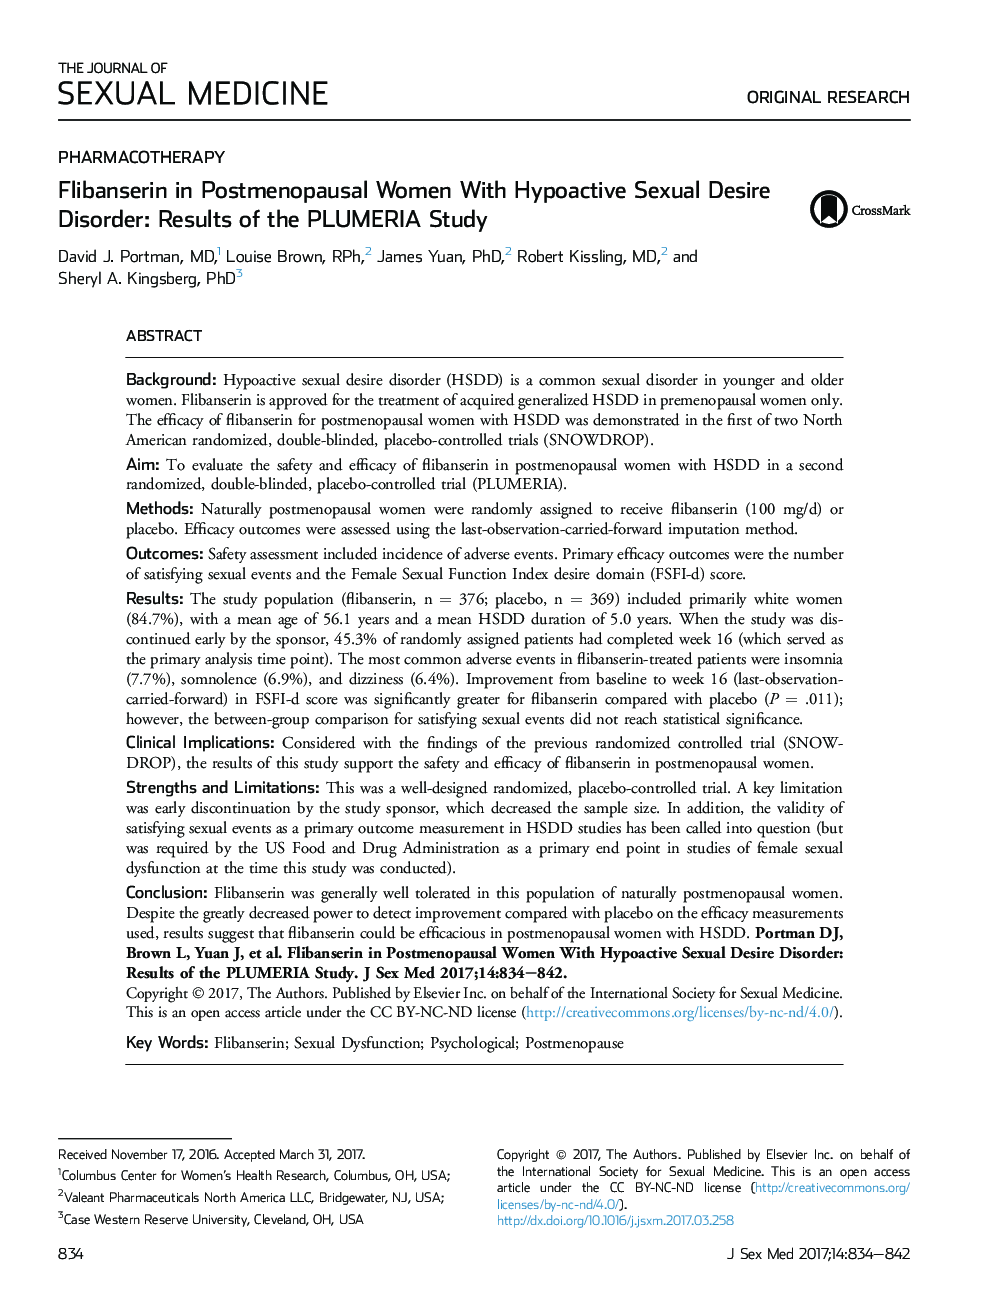 Original ResearchPharmacotherapyFlibanserin in Postmenopausal Women With Hypoactive Sexual Desire Disorder: Results of the PLUMERIA Study